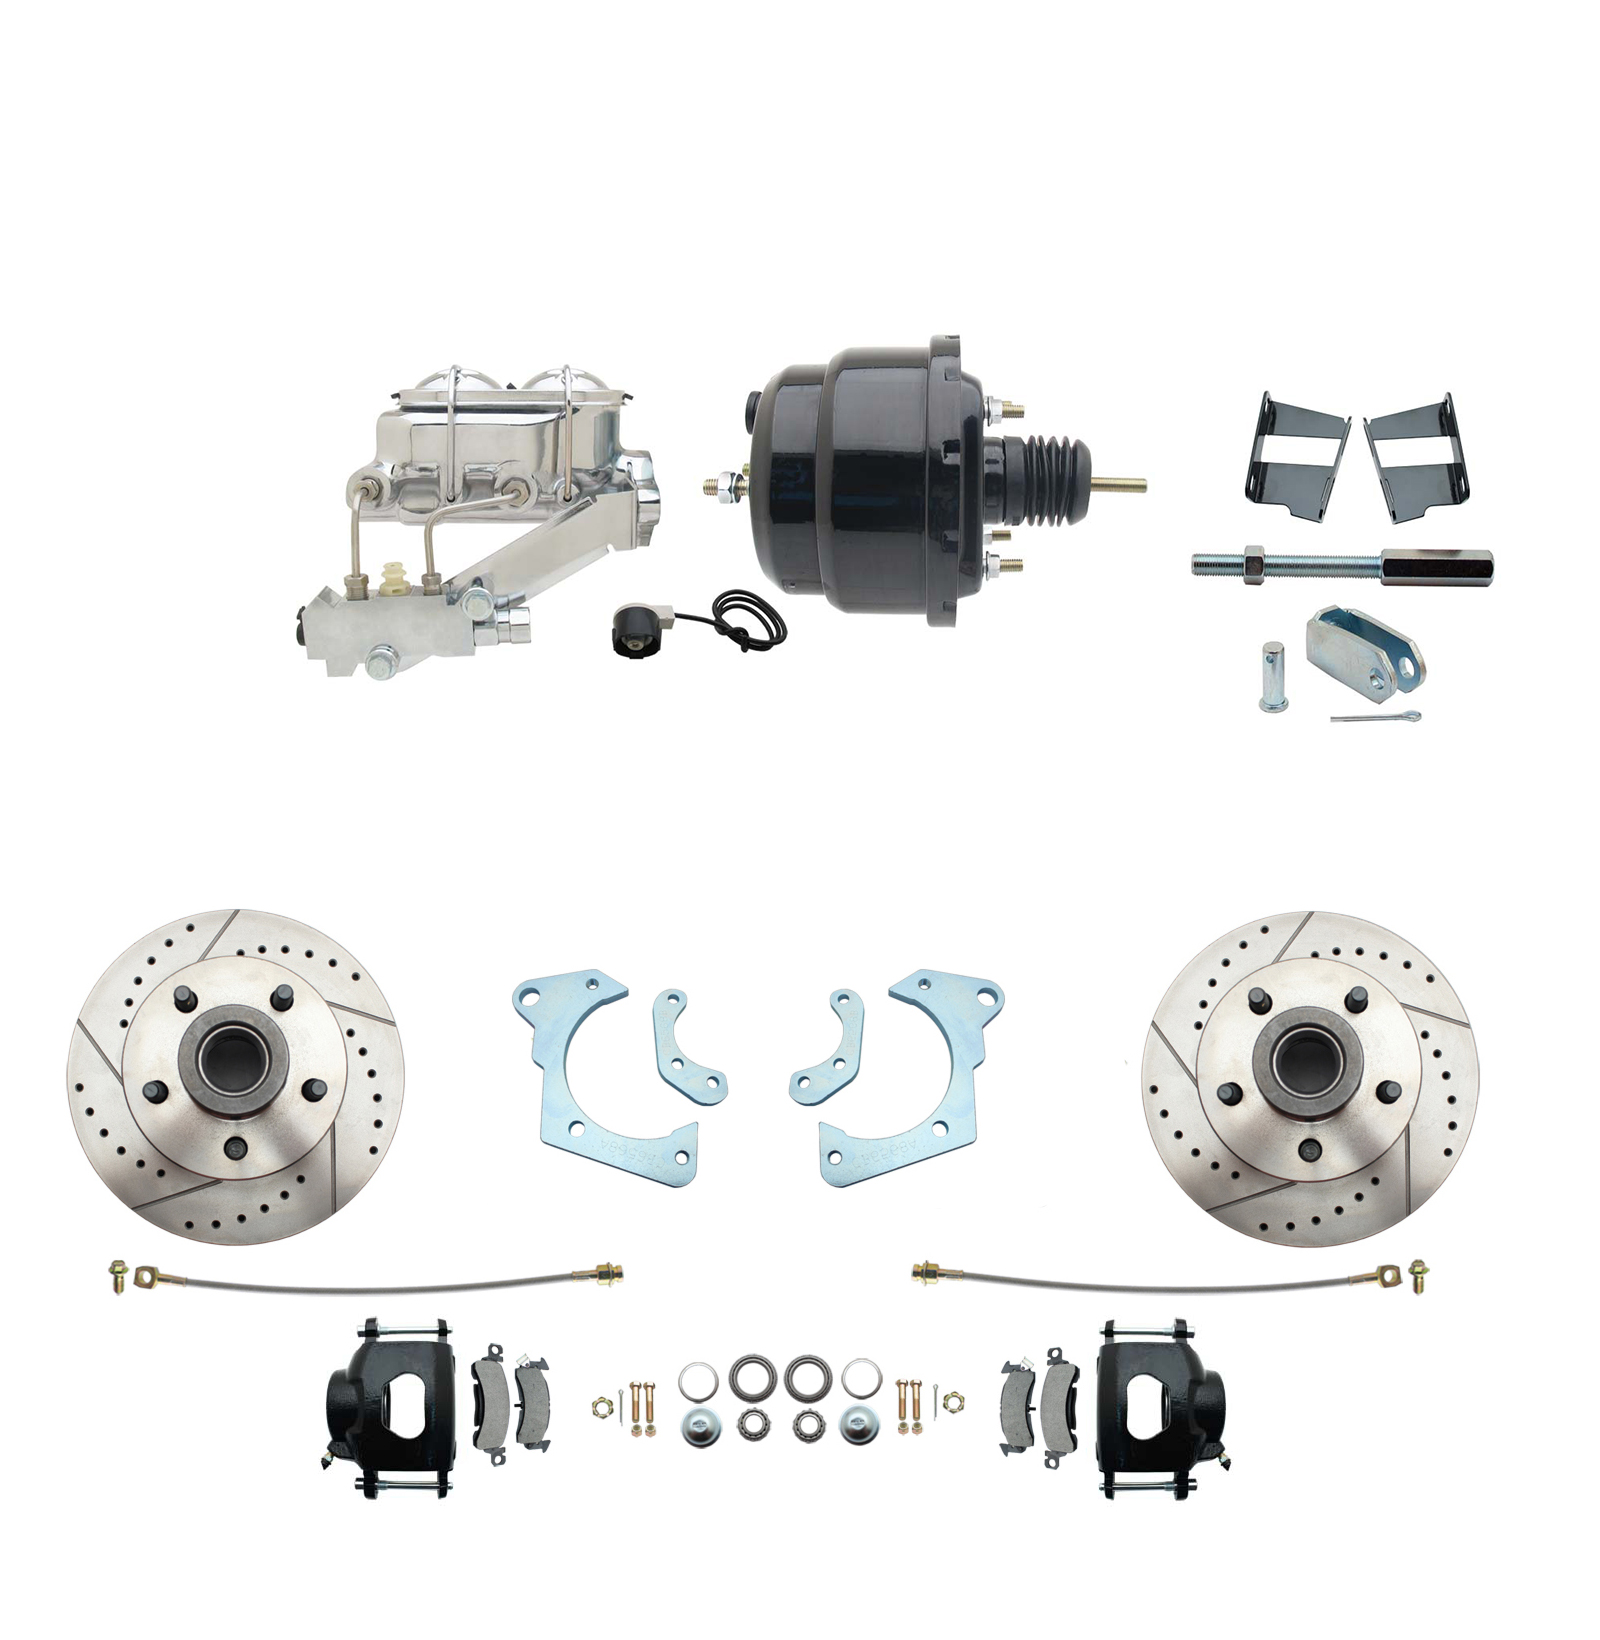 1965-1968 GM Full Size Front Disc Brake Kit Black Powder Coated Calipers Drilled/Slotted Rotors (Impala, Bel Air, Biscayne) & 8 Dual Powder Coated Black Booster Conversion Kit W/ Chrome Master Cylinder Left Mount Disc/ Drum P